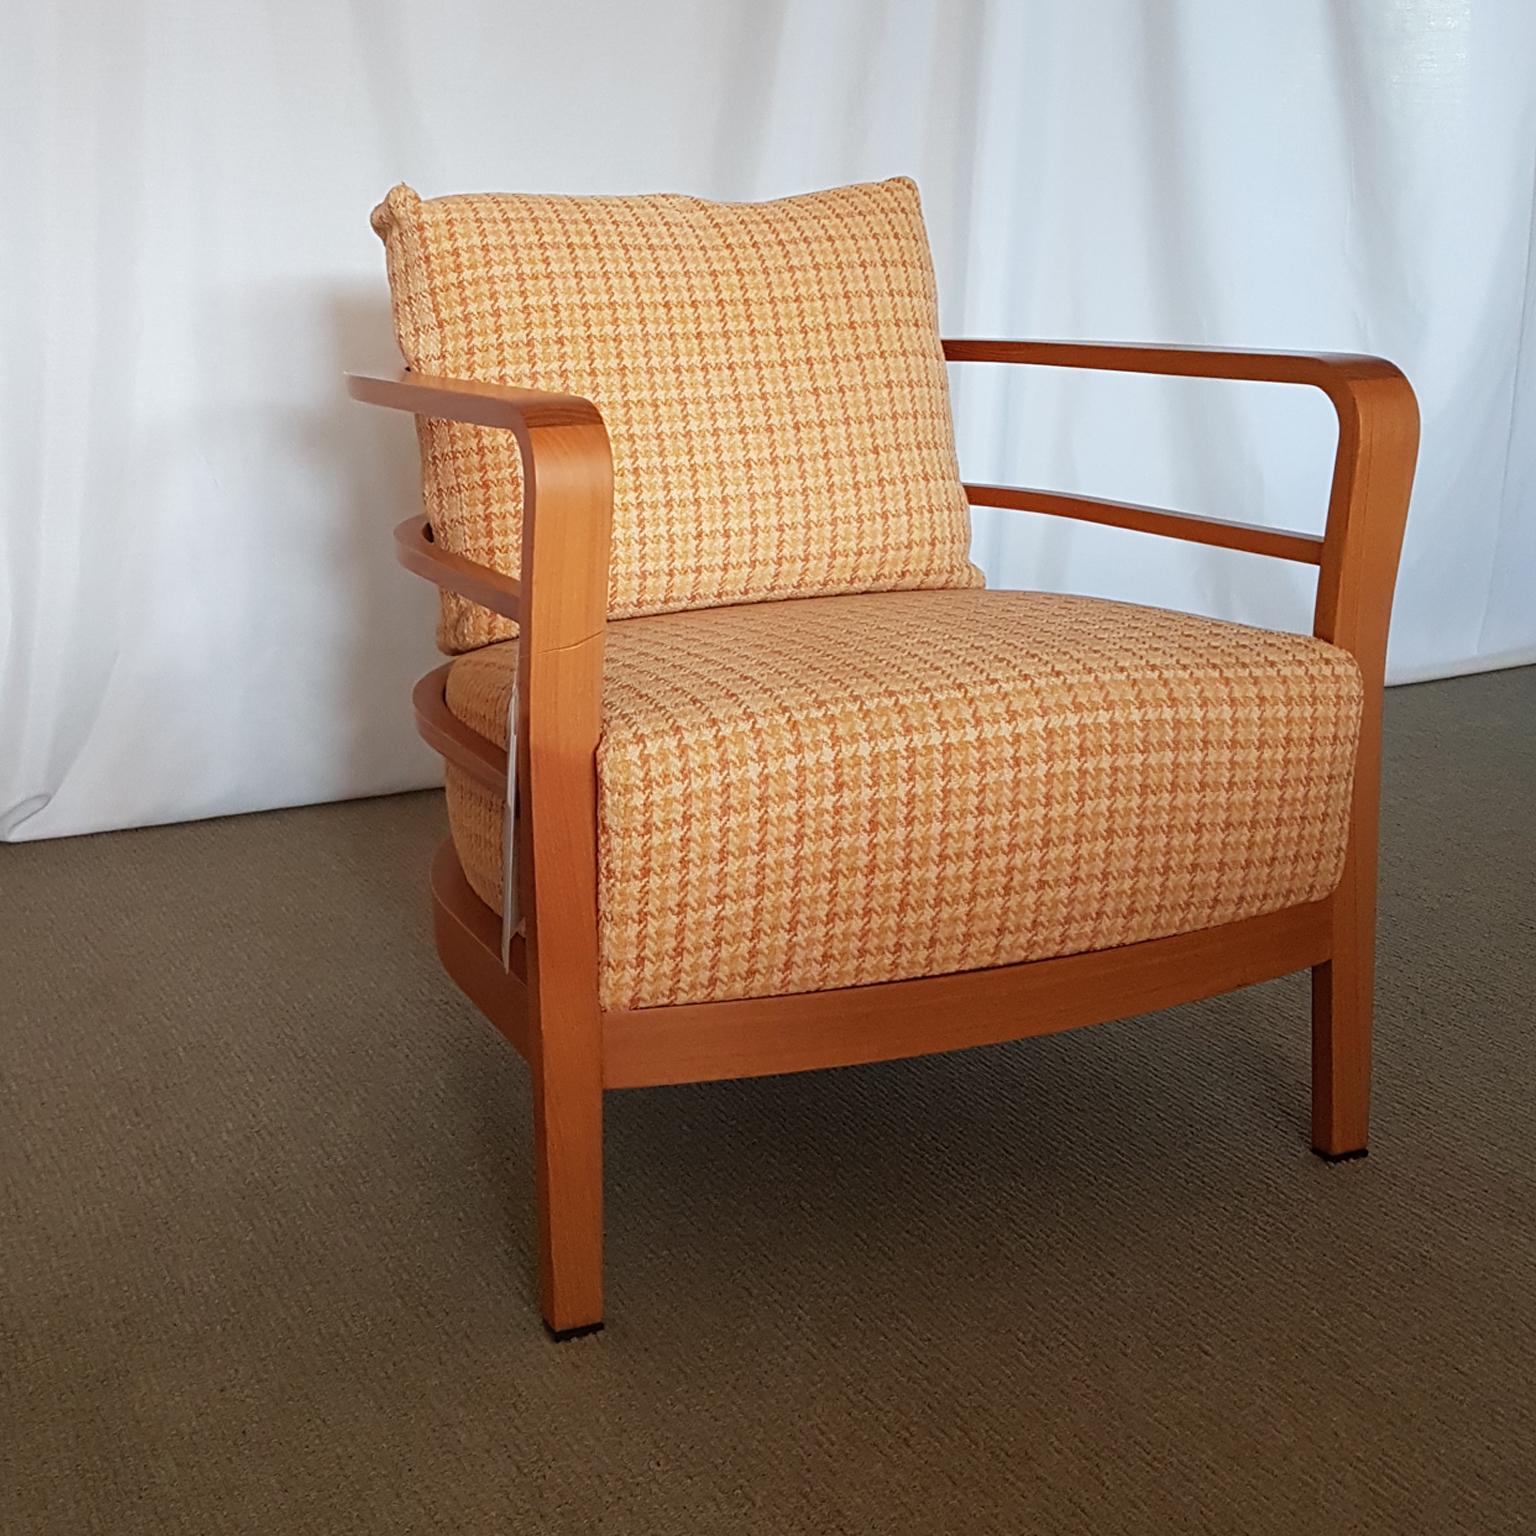 Orange and Yellow Cotton Fabric Italian Armchair with Frame in Teak Wood For Sale 5